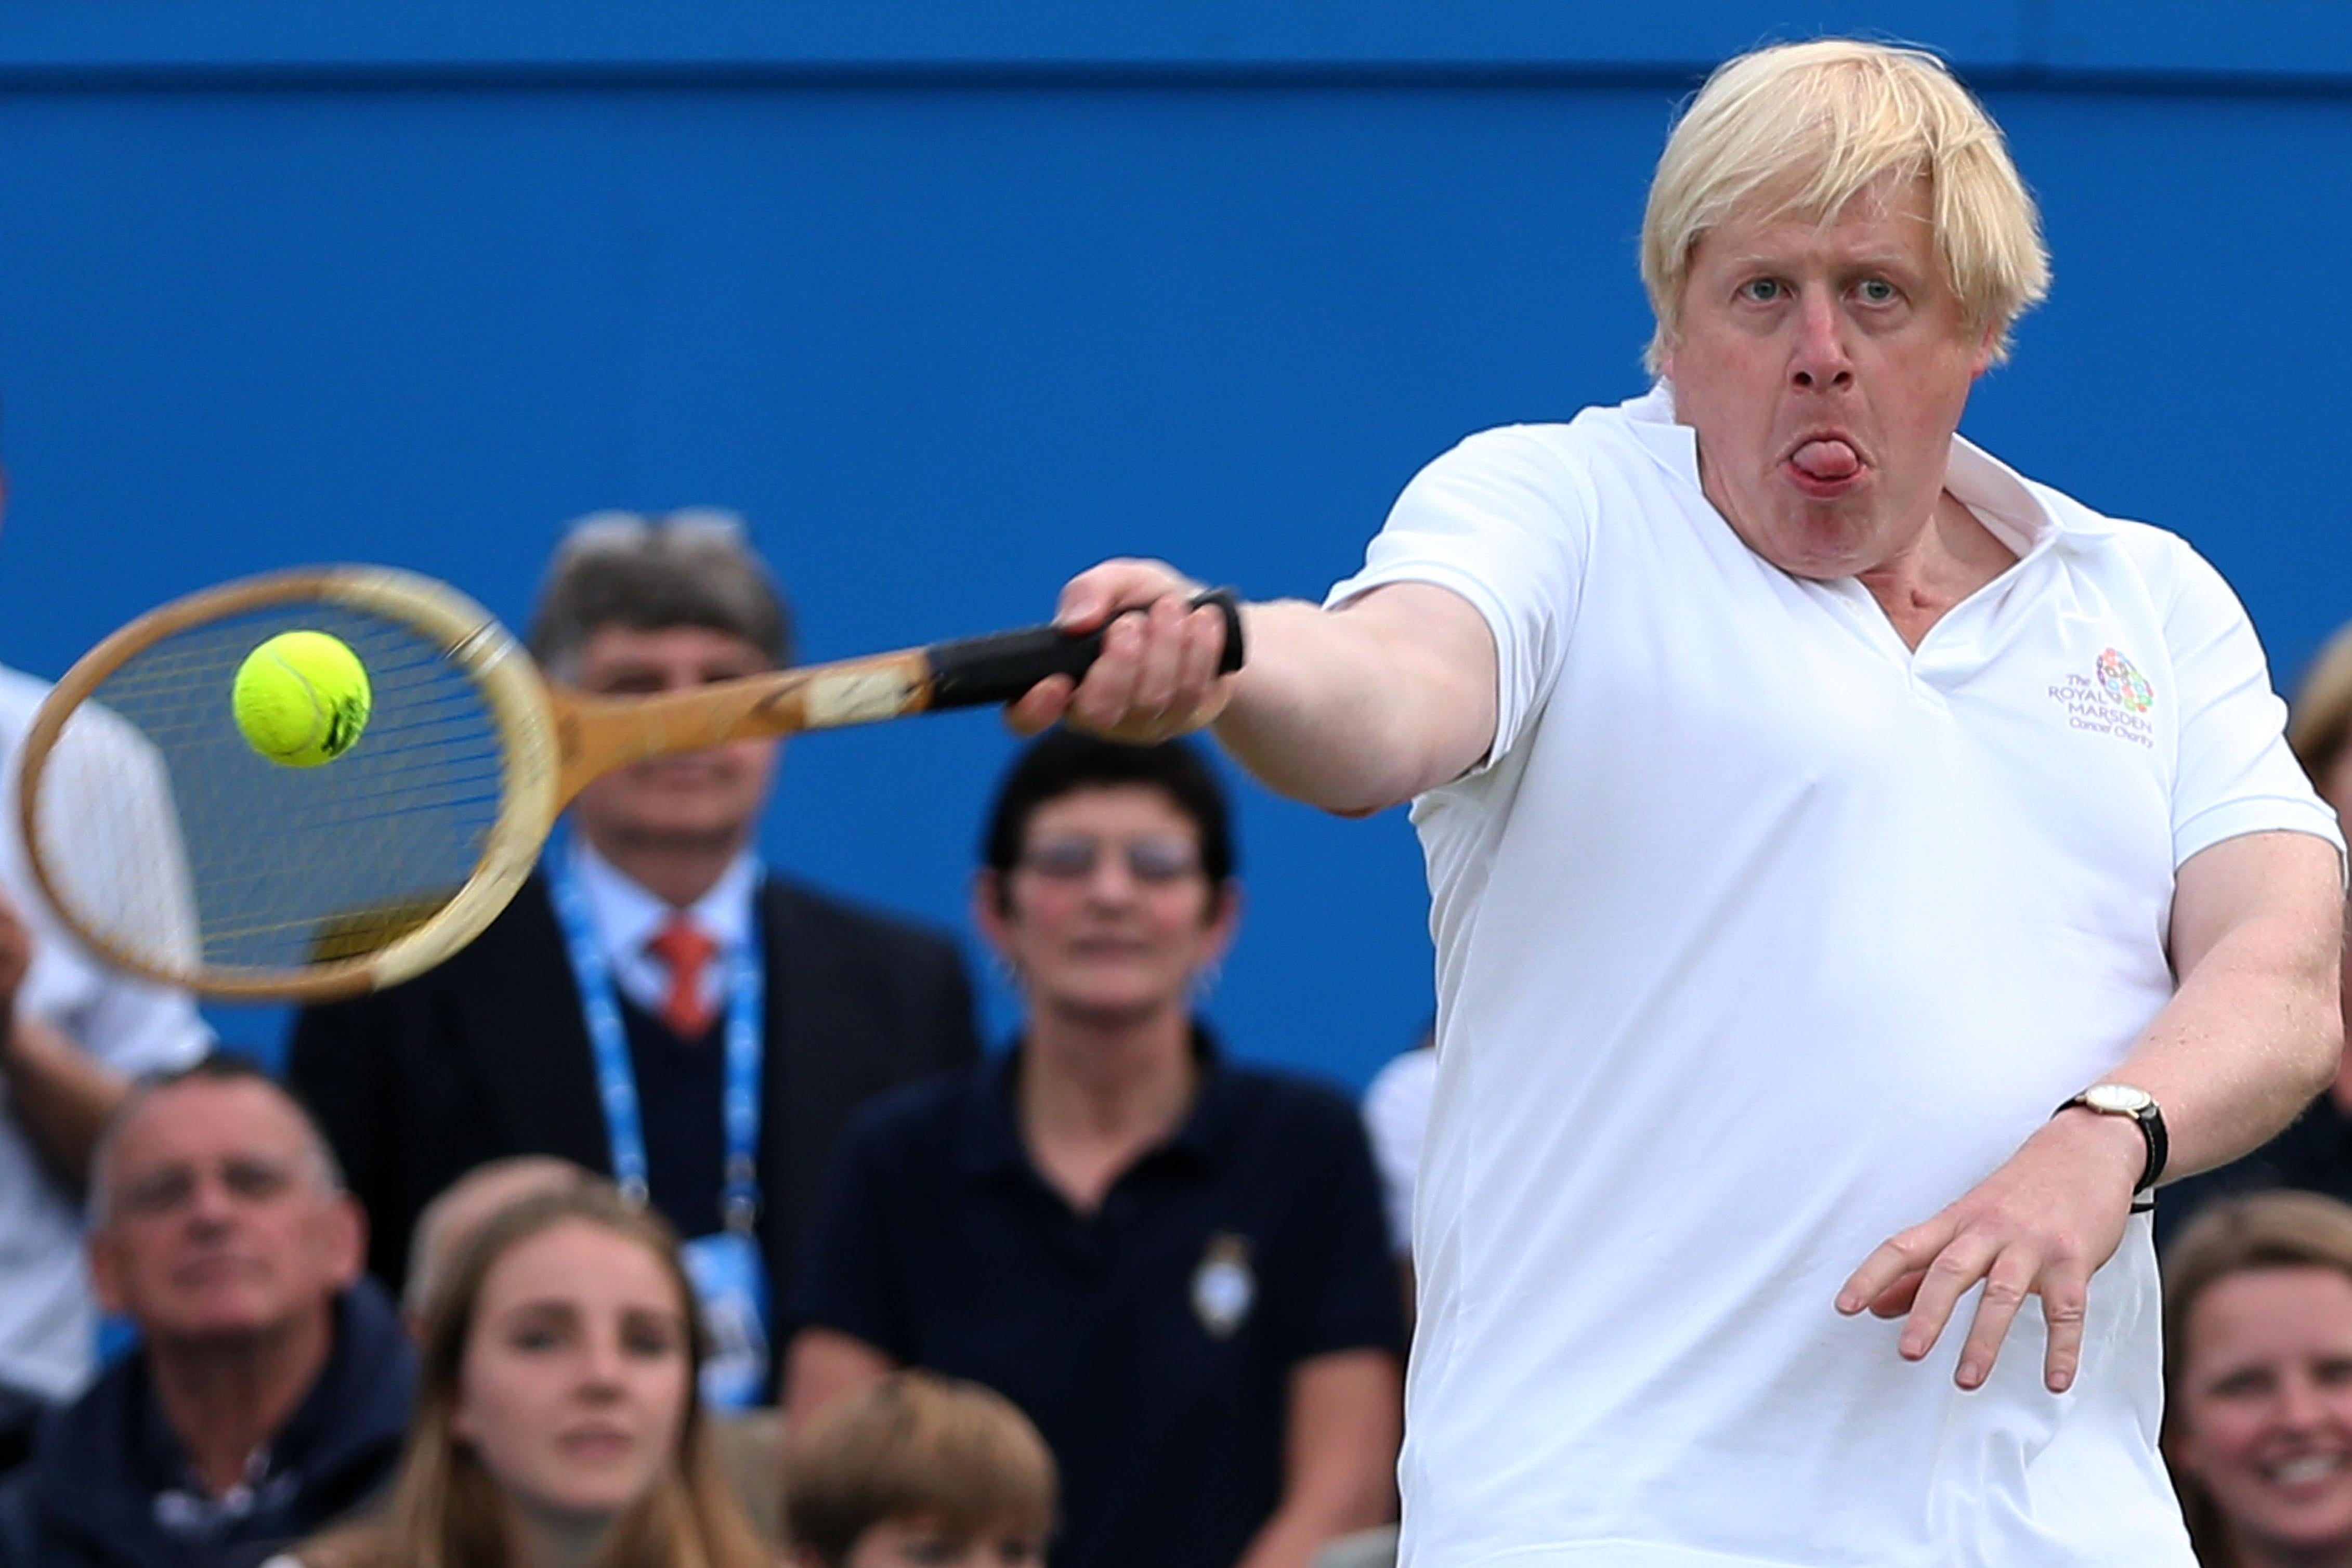 Boris Johnson sticks his tongue out as he hits a tennis ball while spectators watch.